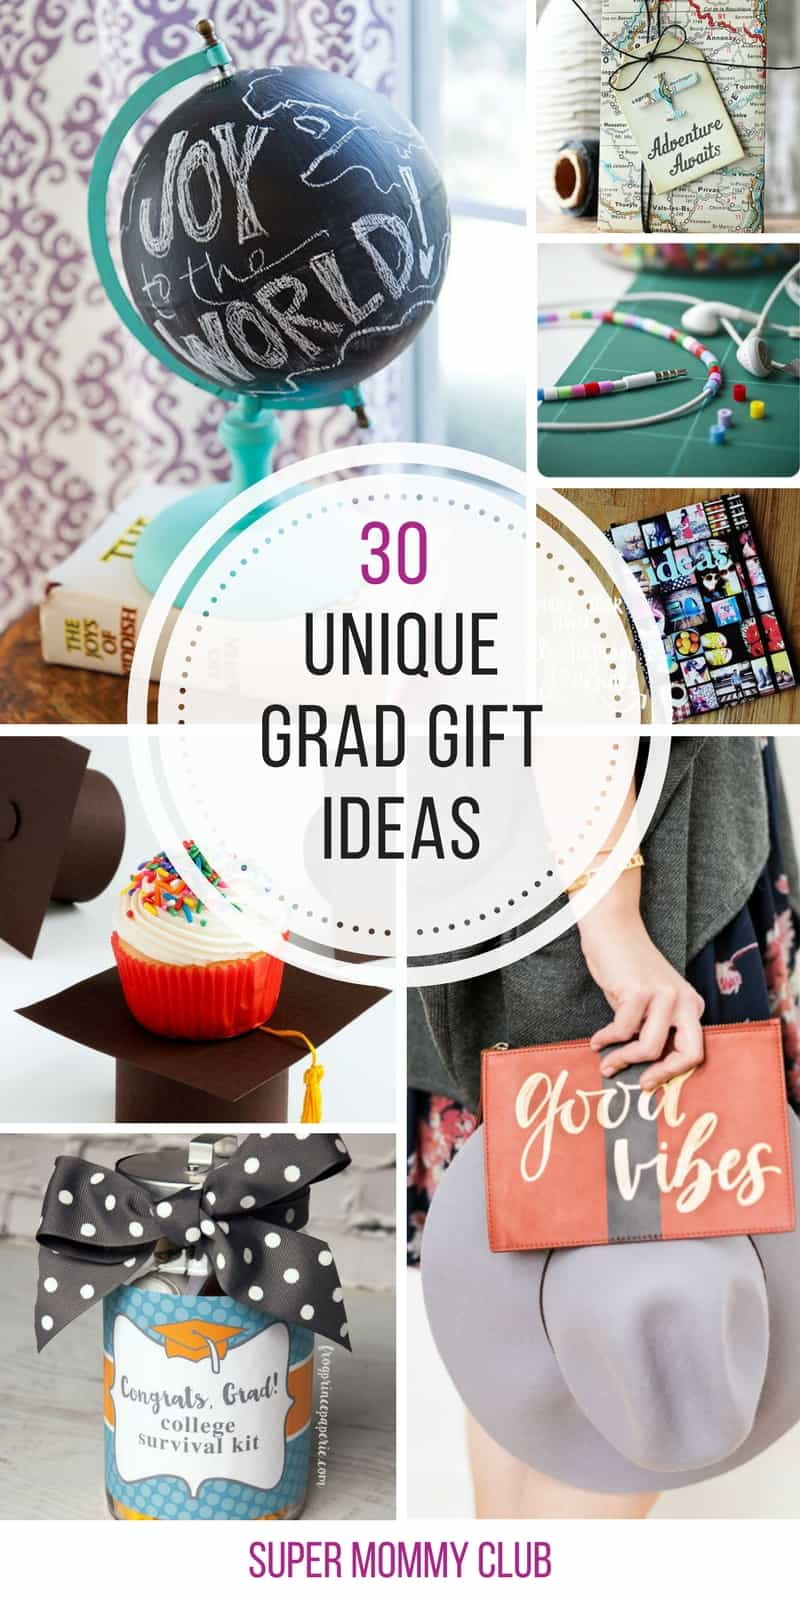 Personalized College Graduation Gift Ideas
 30 Unique College Graduation Gift Ideas They ll Actually